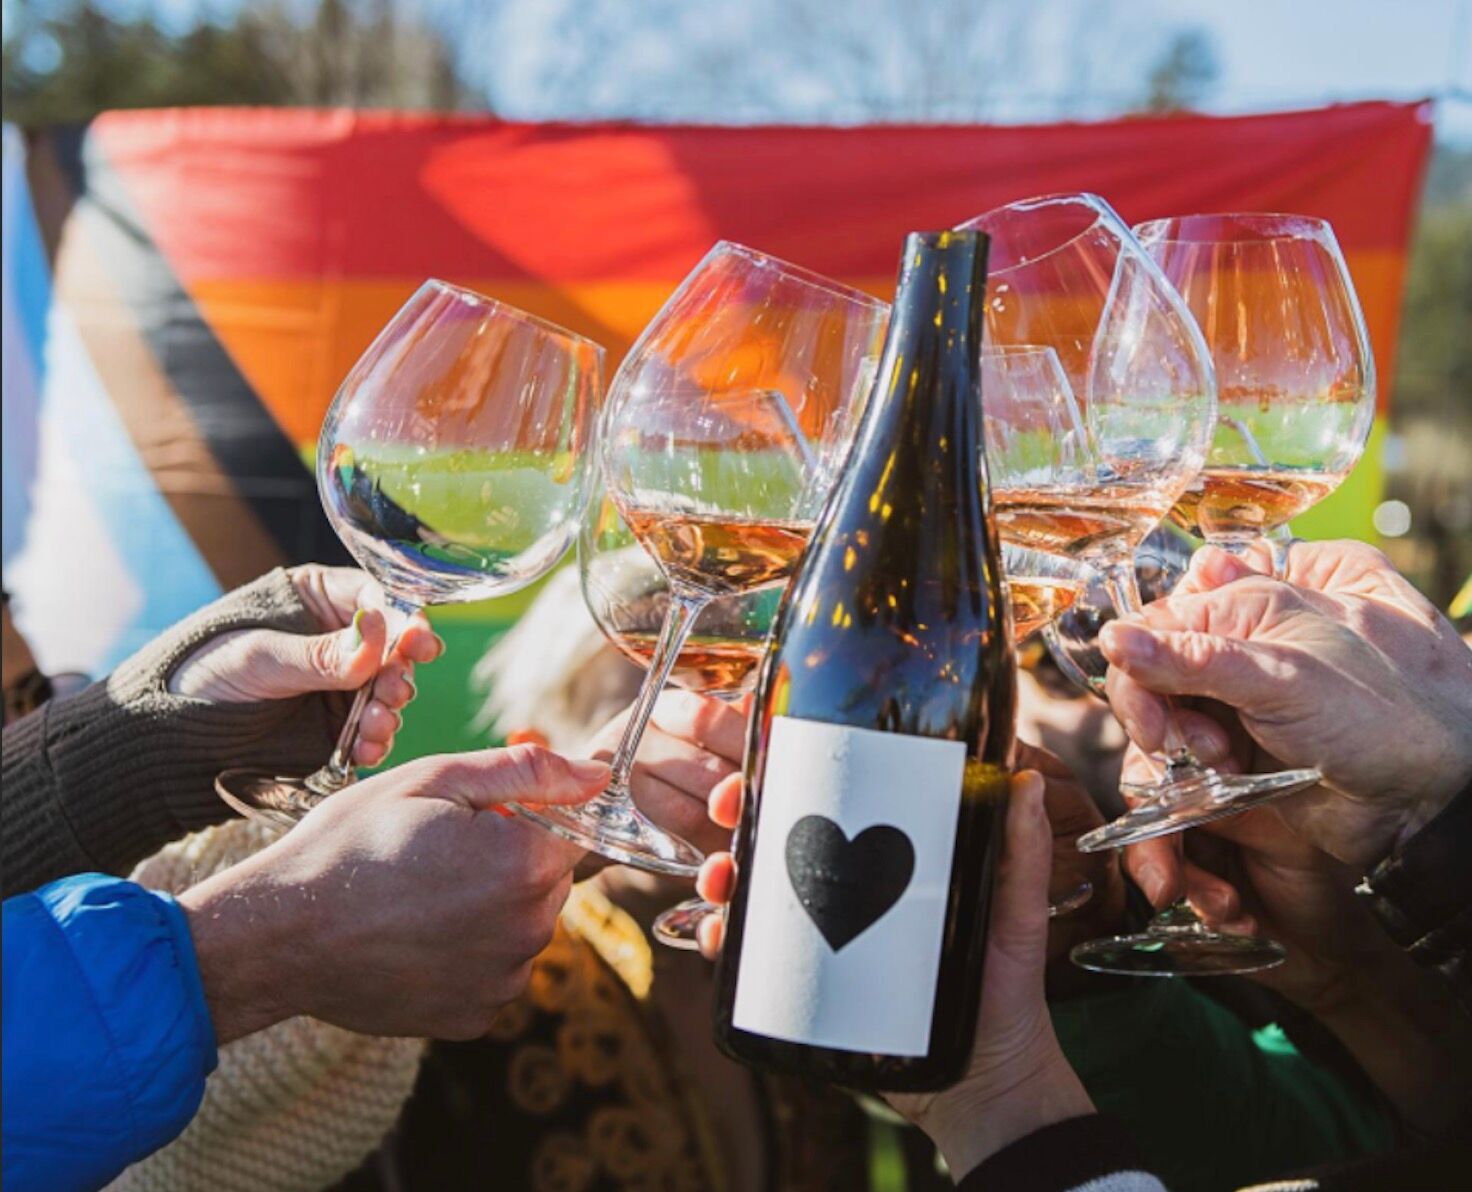 Queer Fine Fest, glasses clink with a bottle of wine with a heart label against a Pride flag